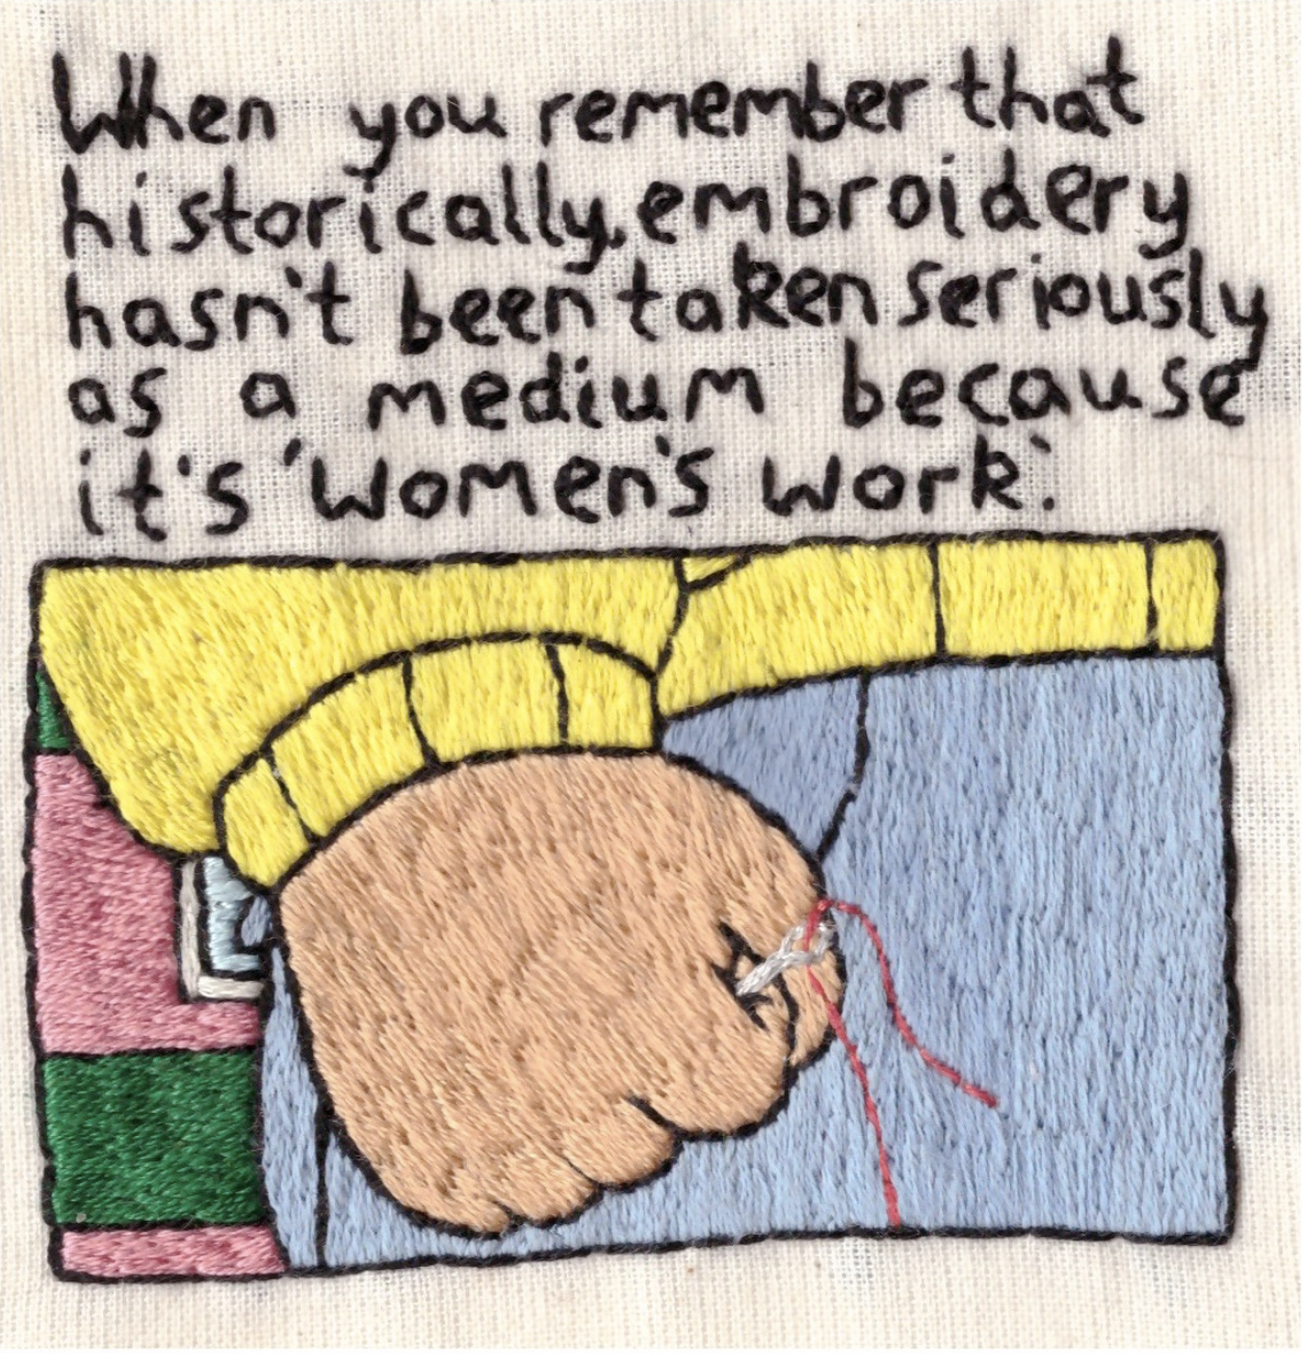 An image and a text are embroidered on a piece of white cloth. The text says: “When you remember that historically, embroidery hasn’t been taken seriously as a medium because it’s women’s work.” The image shows a clenched hand holding a needle and yarn and is a reference to the cartoon character Arthur.